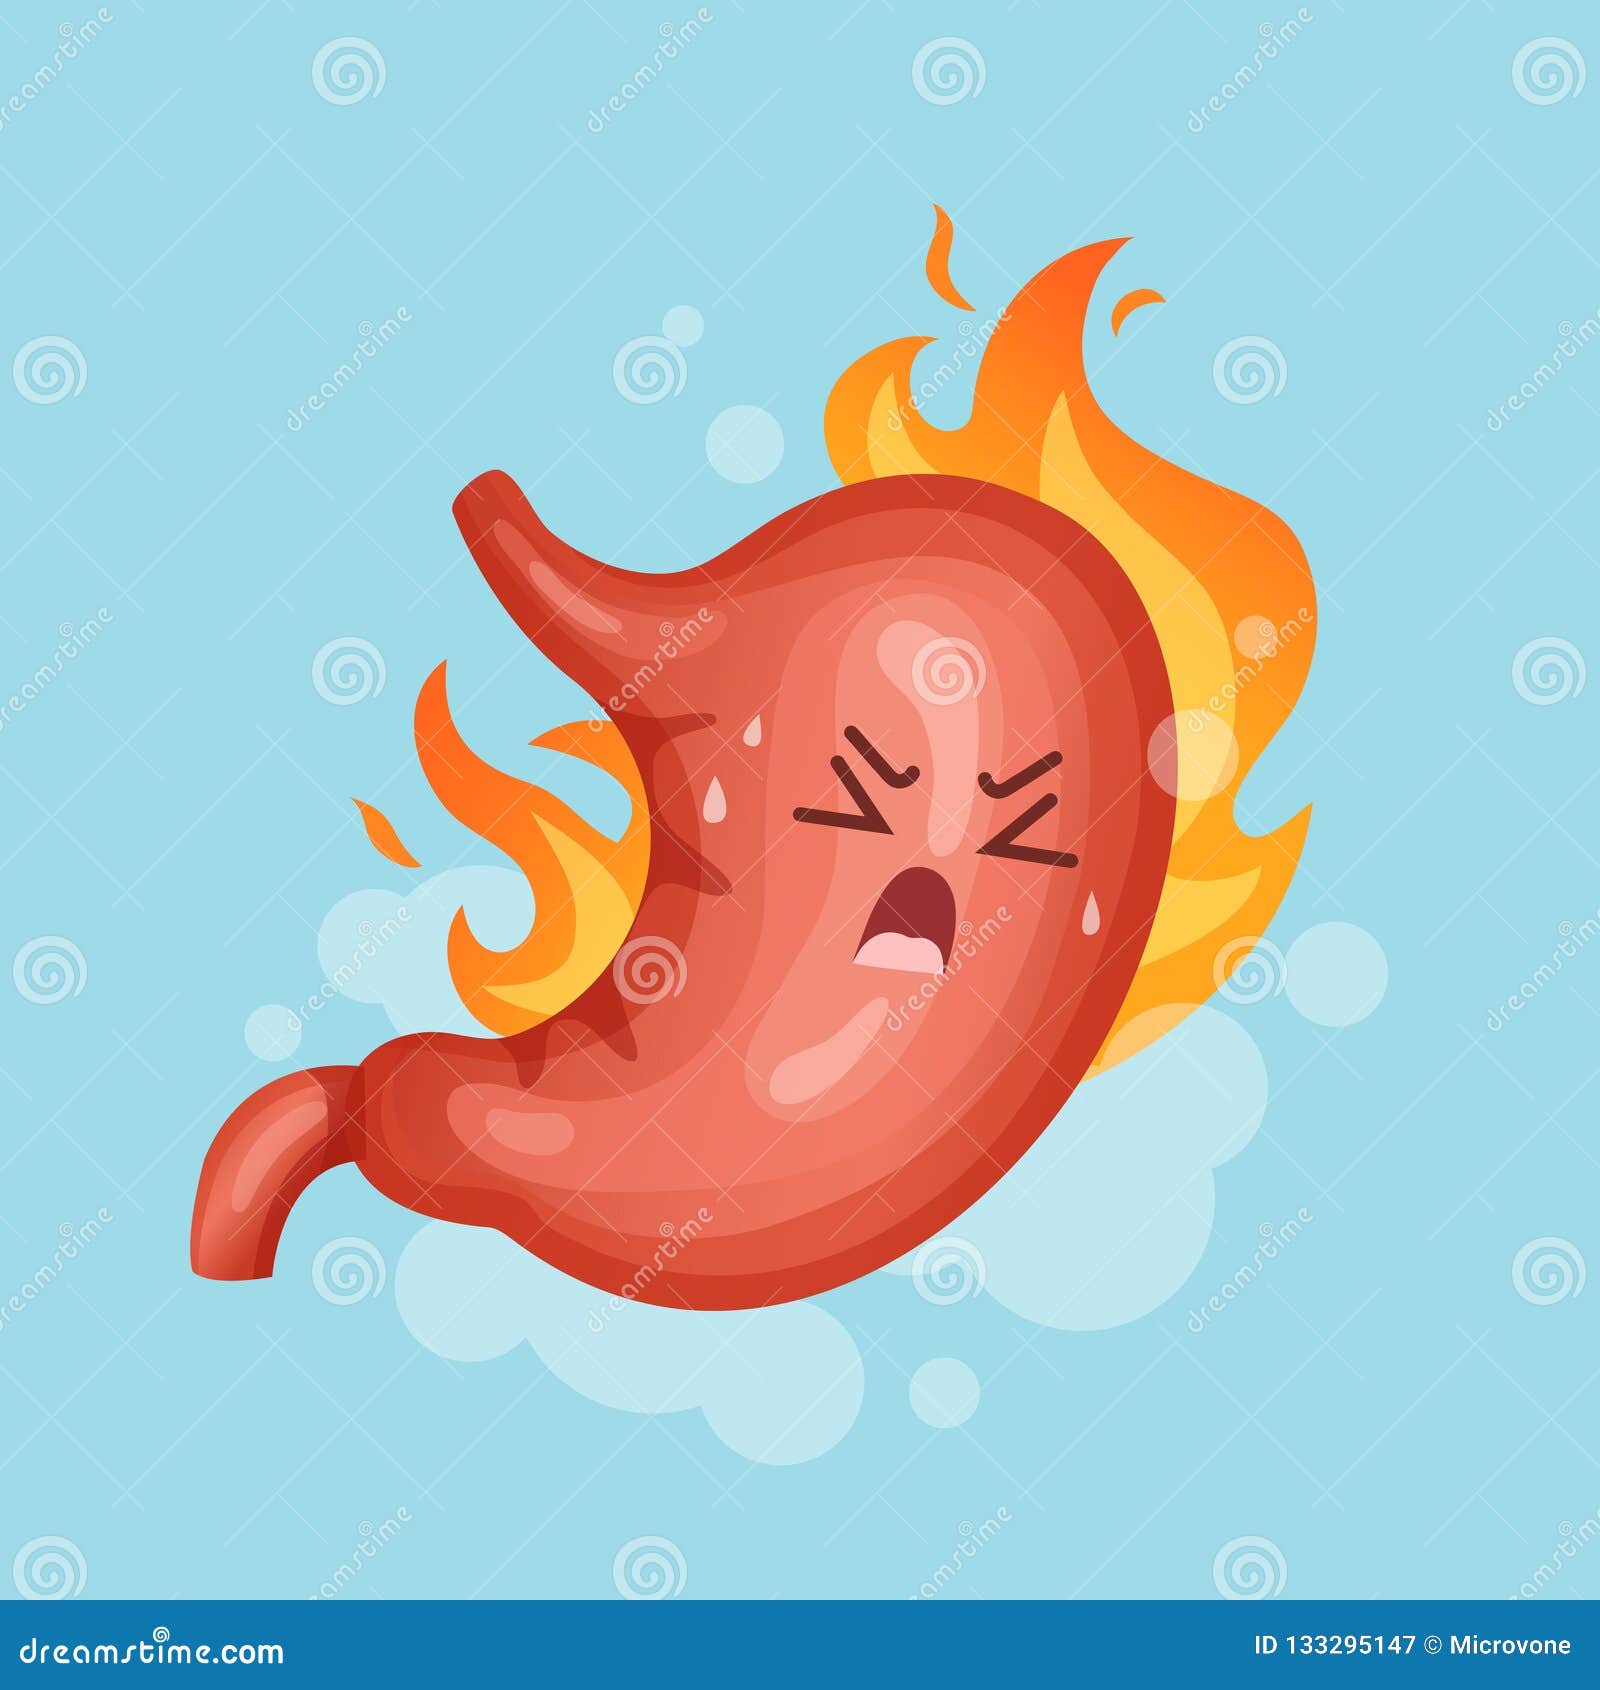 stomach heartburn. gastritis and acid reflux, indigestion and stomach pain problems  concept